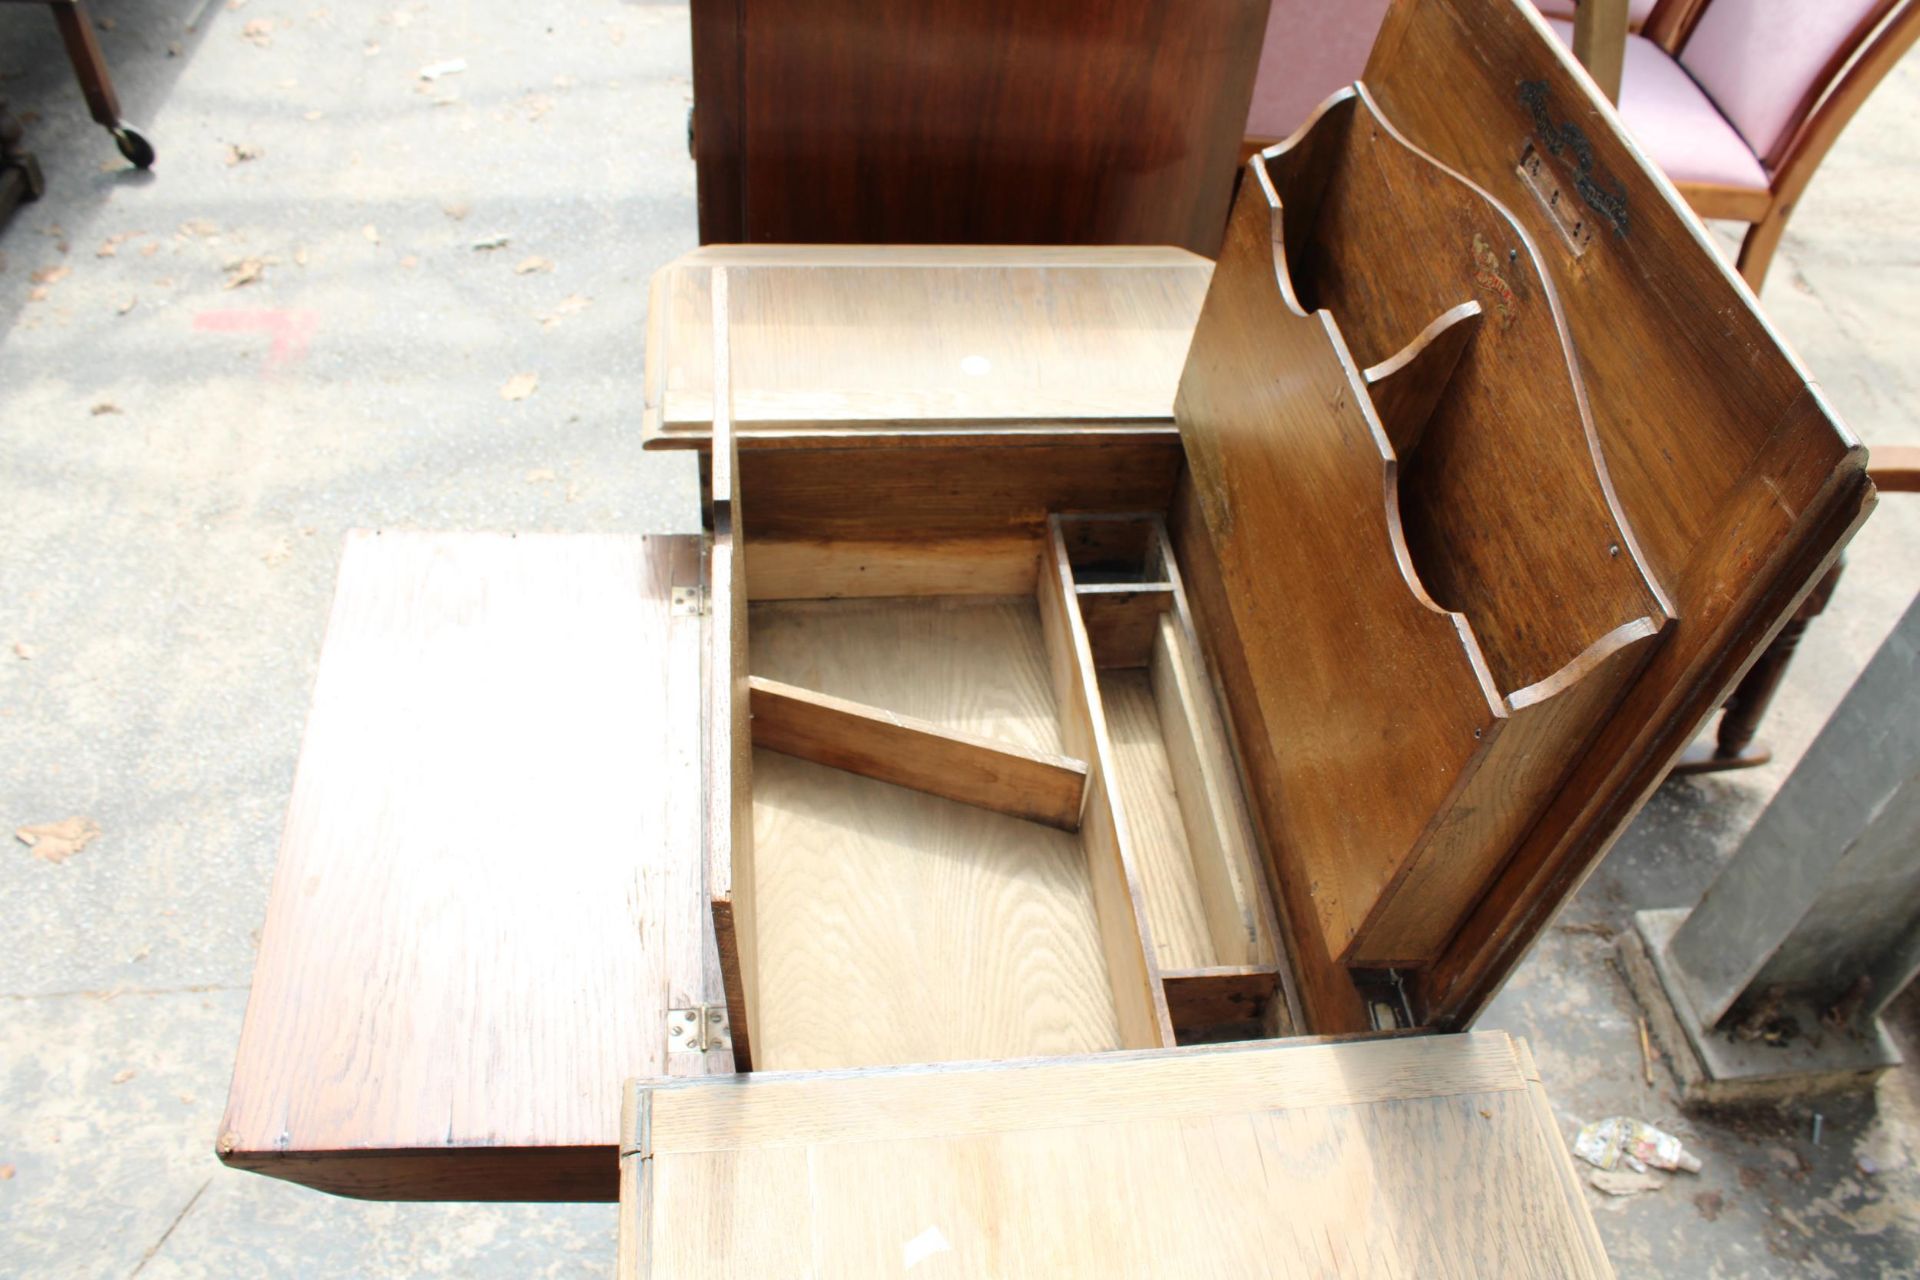 AN EARLY 20TH CENTURY OAK 'THE BRITISHER DESK' WITH FOLD-OUT WRITING AND STORAGE SECTIONS, 36" WIDE - Image 5 of 6